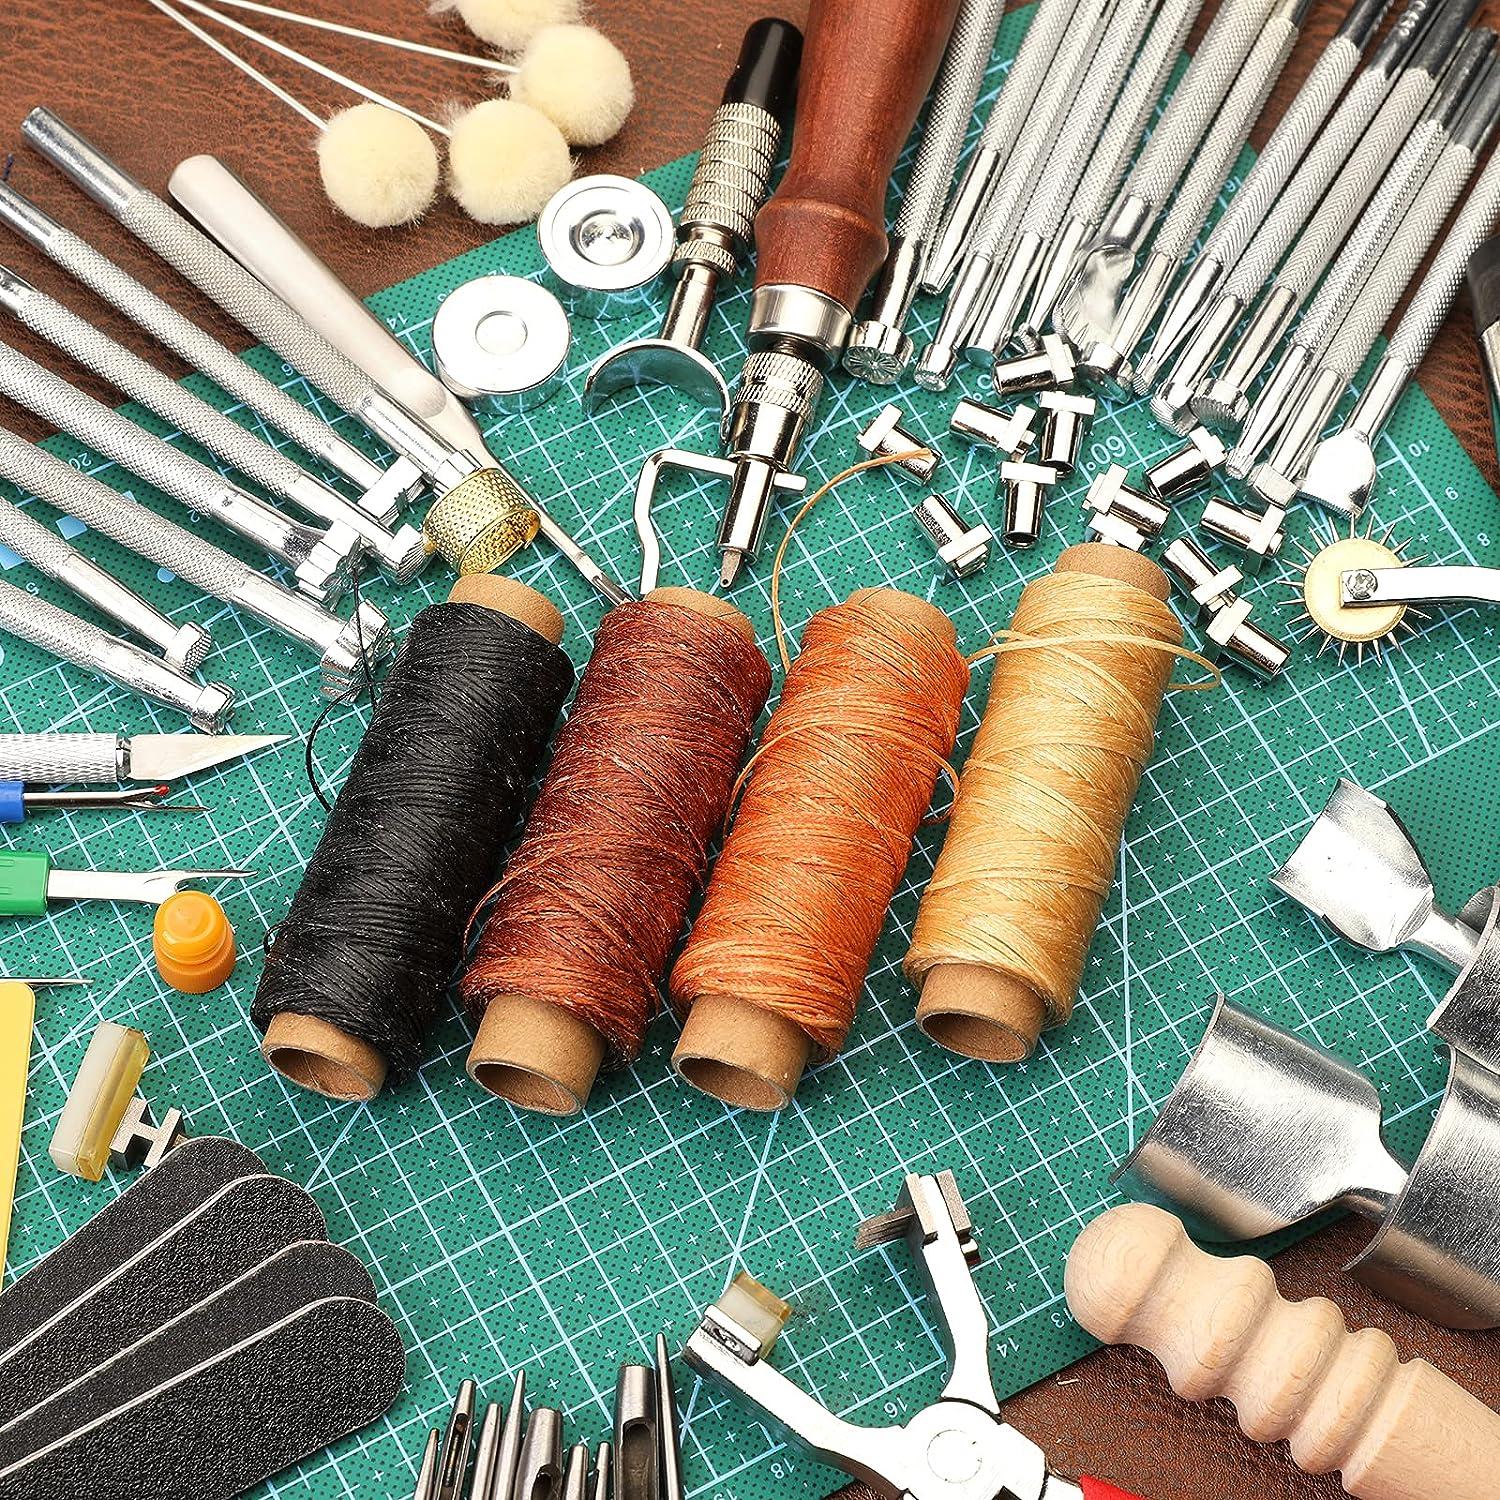  Leather Sewing Kit, Leather Working Tools and Supplies